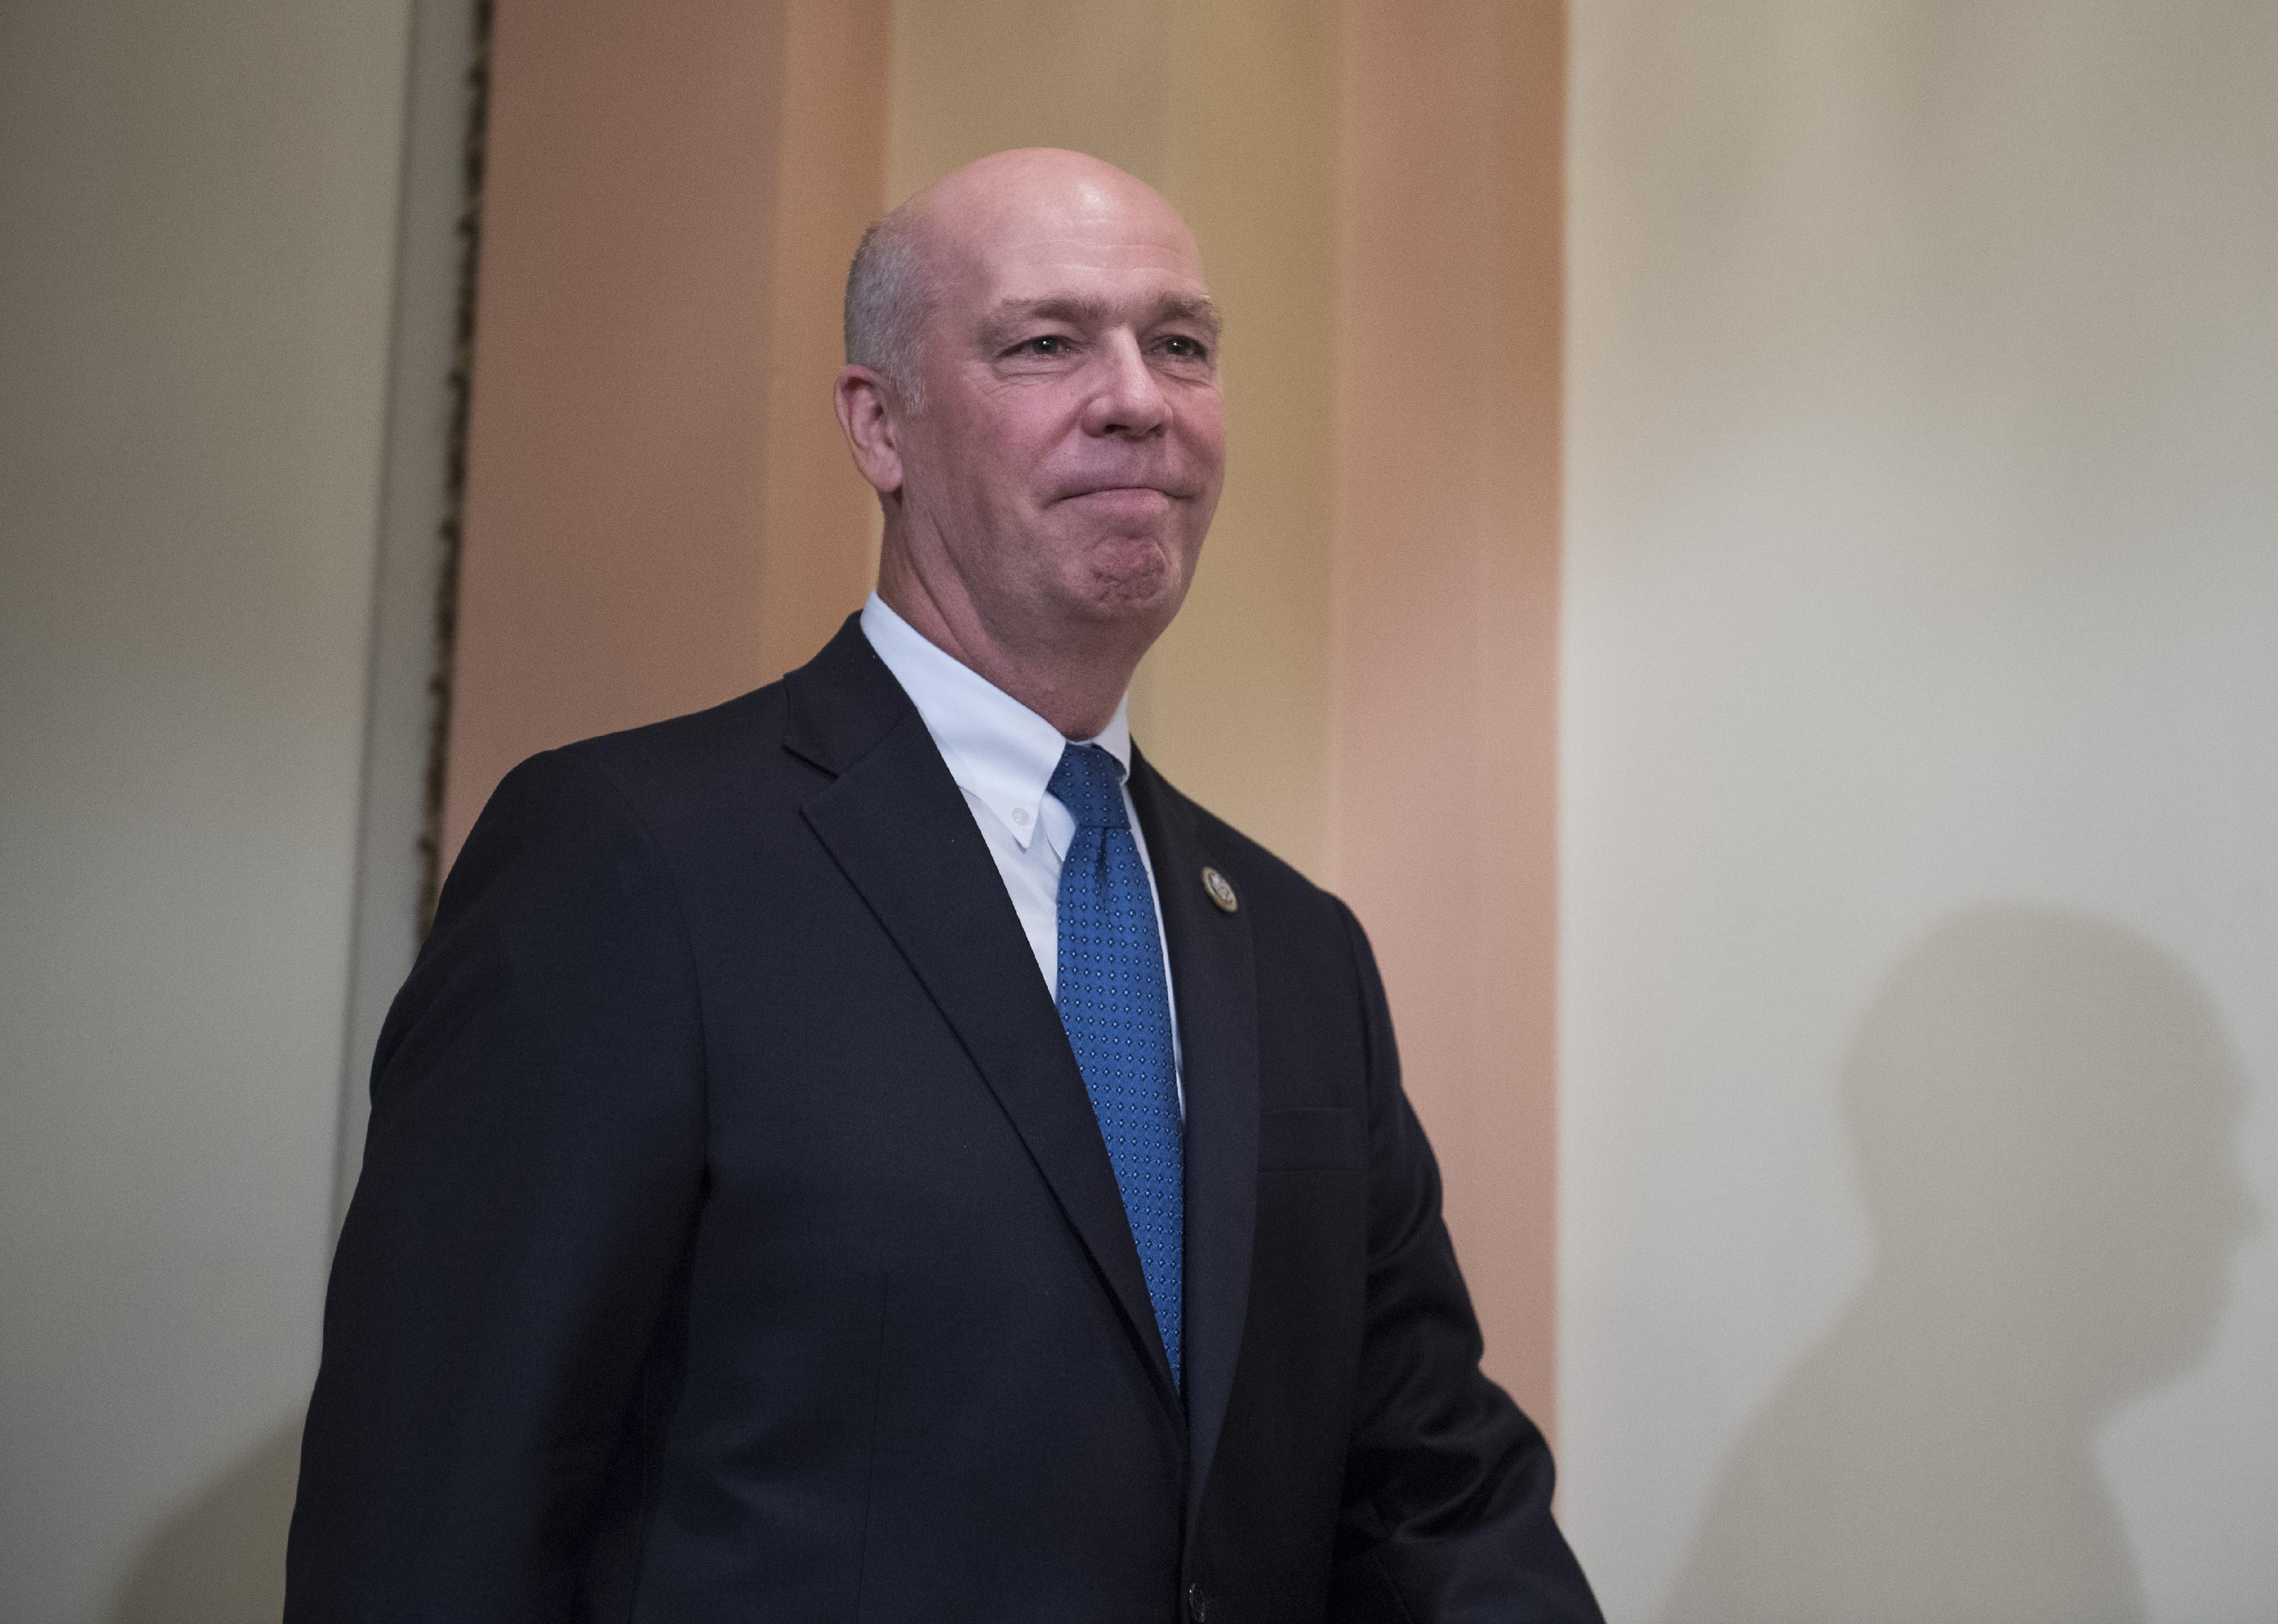 Greg Gianforte arrives for a swearing in ceremony in the Capitol